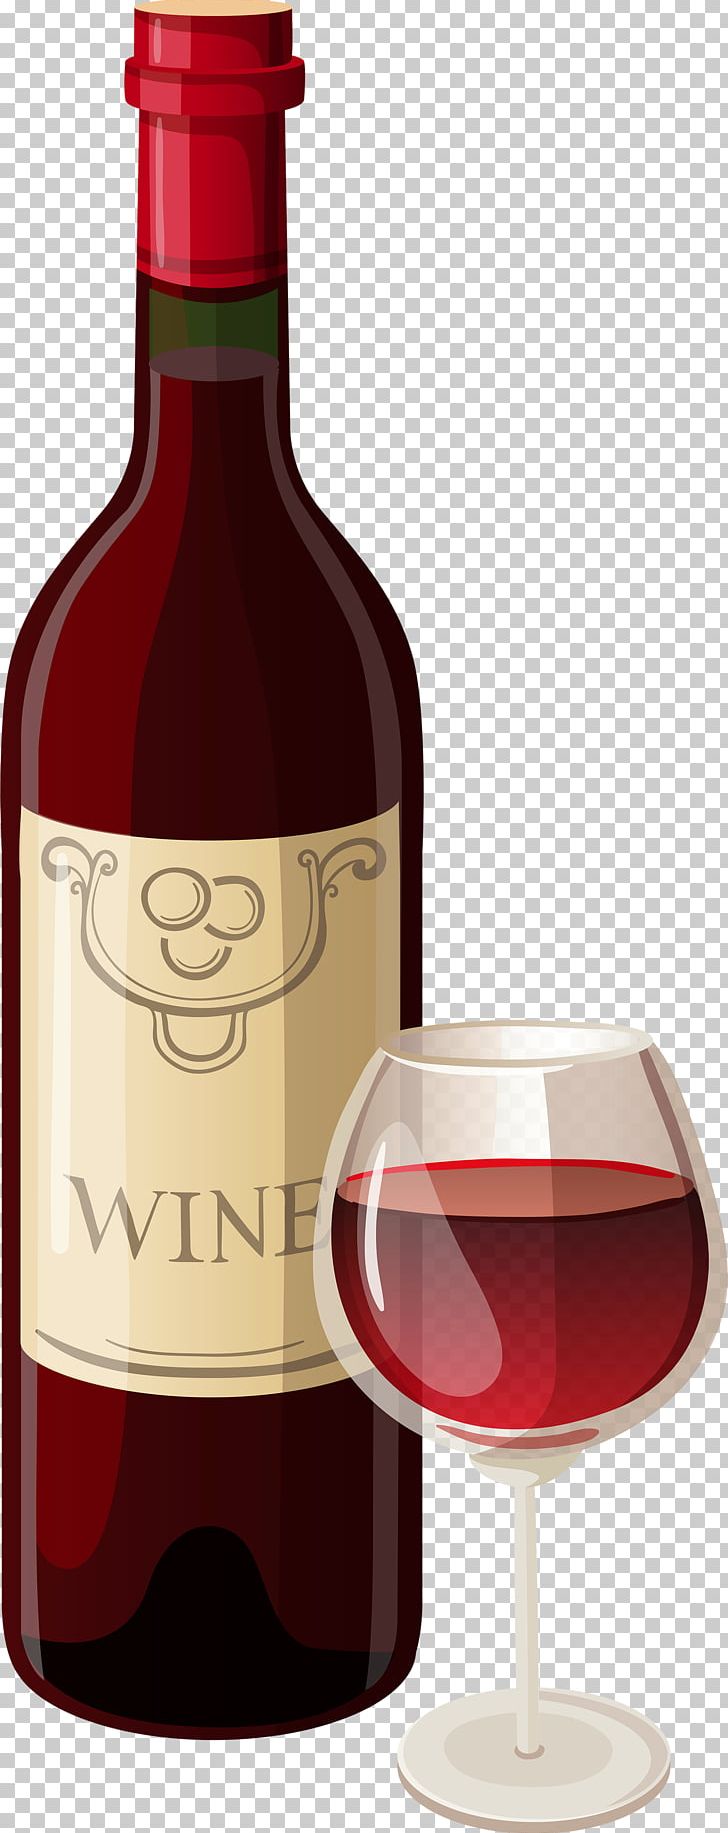 Red Wine Champagne Bottle PNG, Clipart, Alcoholic Beverage, Champagne Glass, Dessert Wine, Drink, Drinkware Free PNG Download